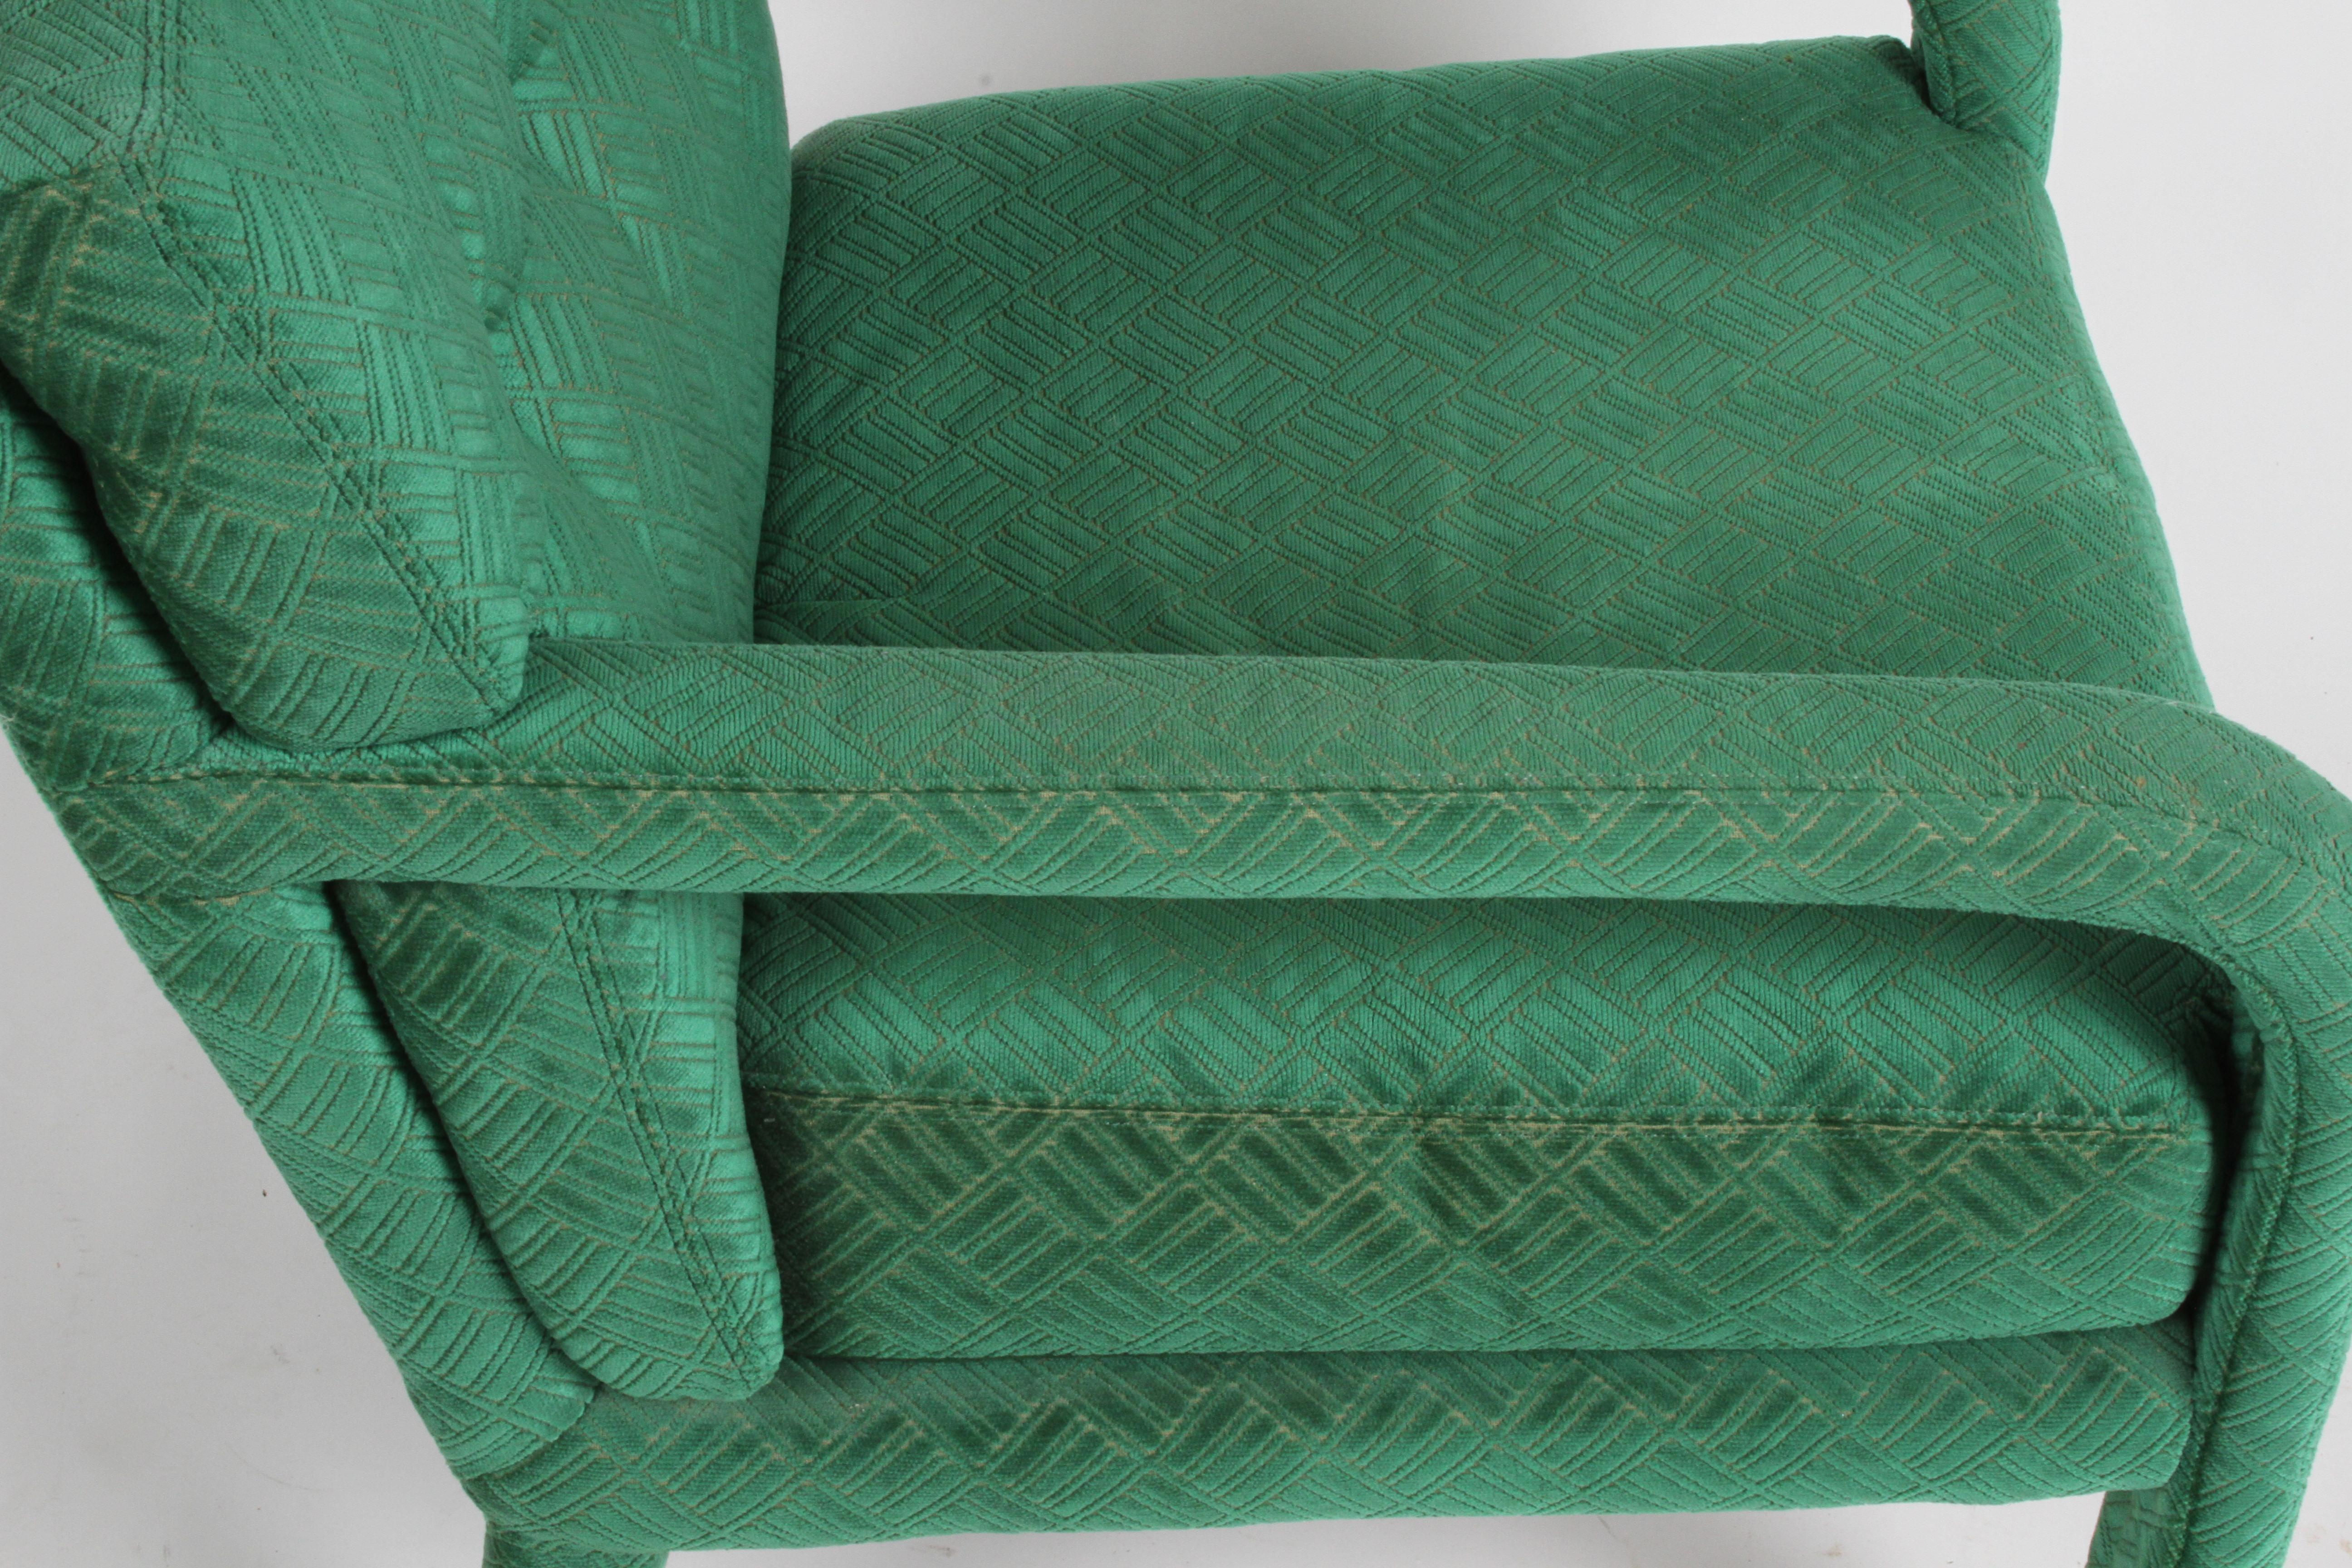 Pair of 1970s Directional Lounge Chairs in a Textured Emerald Green Upholstery 2